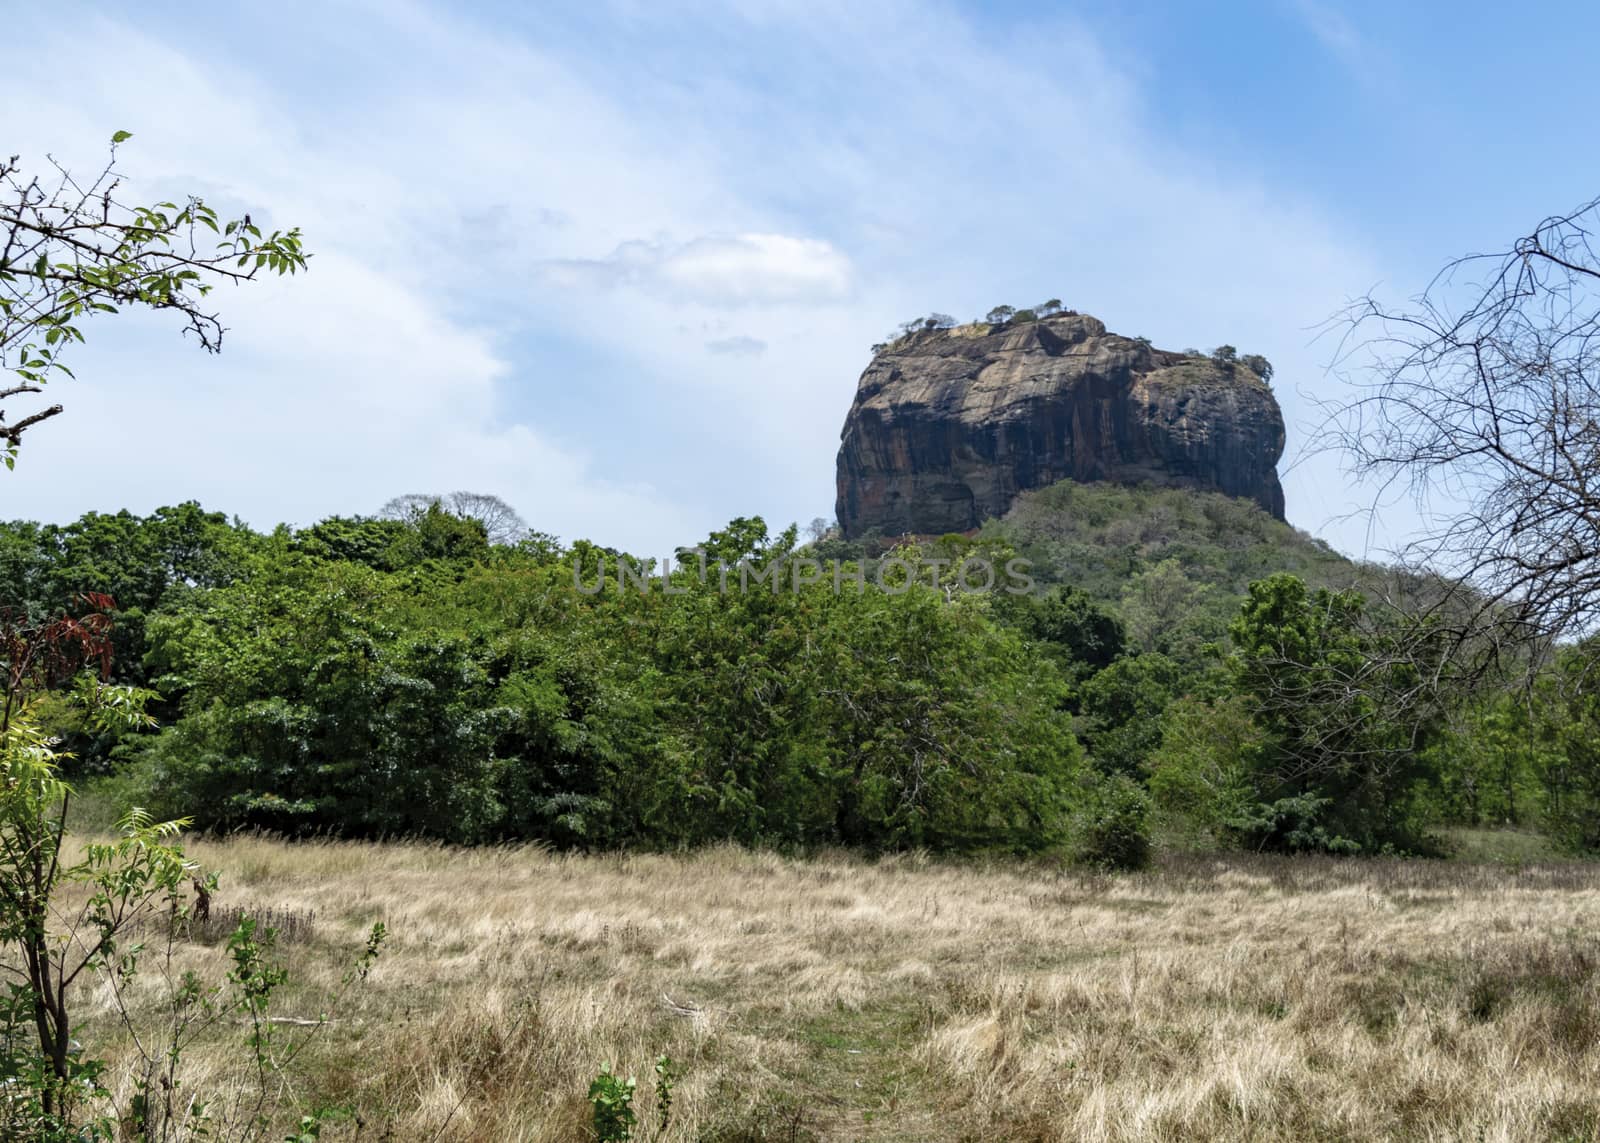 Sri lanka, Sept 2015: Sigiriya Rock Fortress in Sri Lanka. The rock is nearly 200 meters (660 feet) tall and is home to the ruins of a fortress as well as an ancient palace complex.